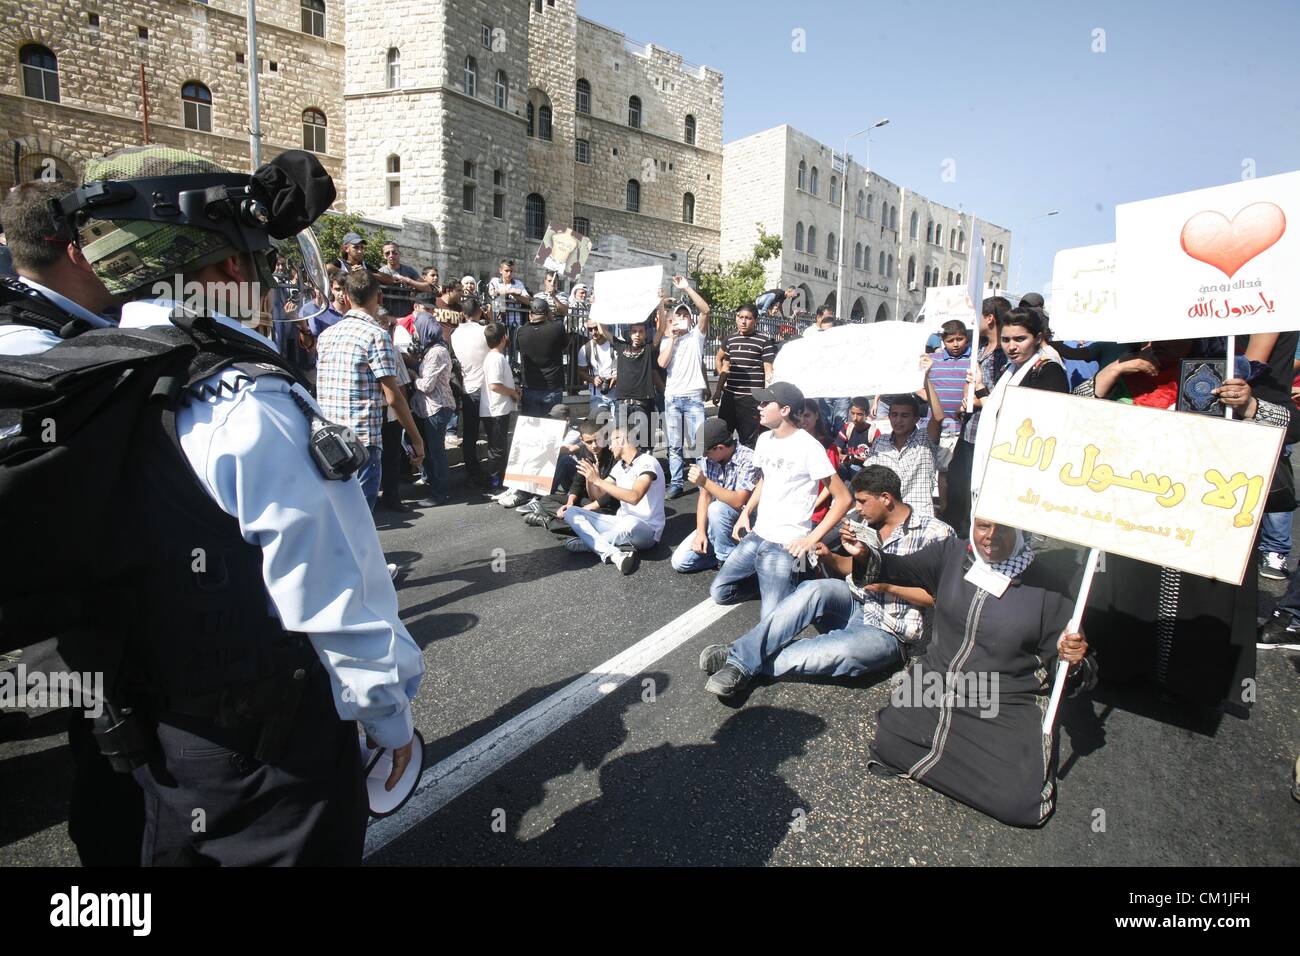 Sept. 14, 2012 - Jerusalem, Jerusalem, Palestinian Territory - Israeli policemen repress a demonstration against the controversial film 'Innocence of Muslims' in front of al-Aqsa Mosqe in Jerusalem, on September 14, 2012. The controversial low budget film reportedly made by an Israeli-American which portrays Muslims as immoral and gratuitous, sparked fury in Libya, where four Americans including the ambassador were killed on Tuesday when a mob attacked the US consulate in Benghazi, and has led to protests outside US missions in Morocco, Sudan, Egypt, Tunisia and Yemen  (Credit Image: © Mahfouz Stock Photo